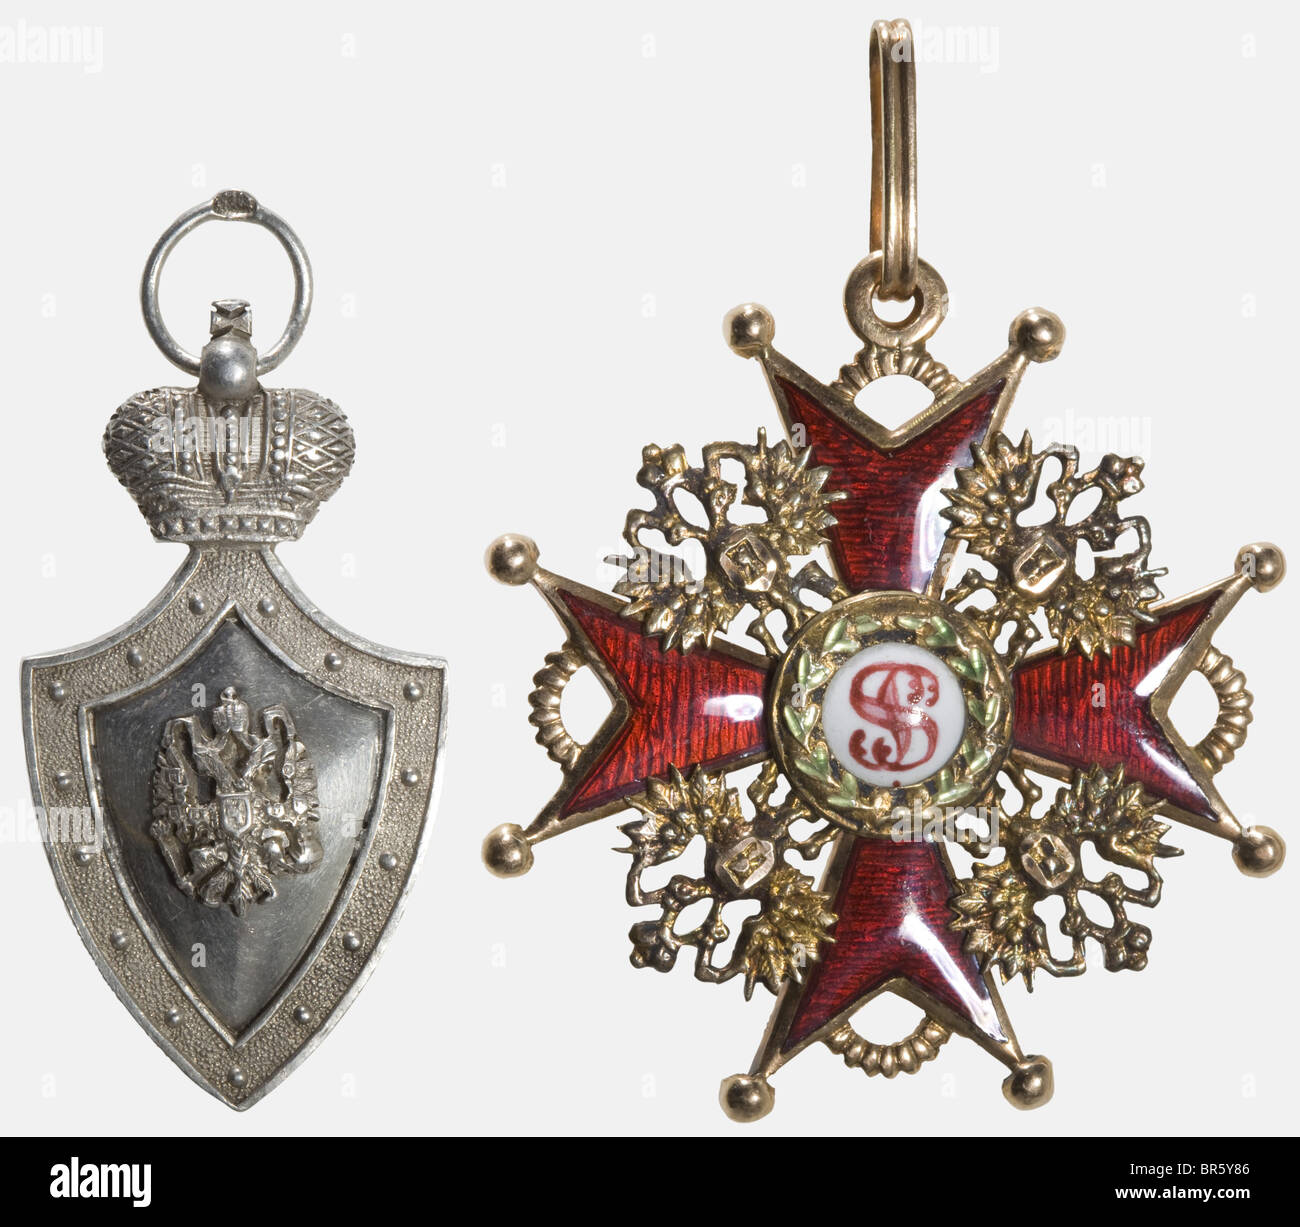 Order of St. Stanislaus, 3rd Class Cross, Albert Keibel, St. Petersburg before 1896 Gold and enamel, reverse punched 'AK' with double-headed eagle, the eyelet with St. Petersburg mark of fineness for 56 zolotniki, suspension ring with kokoschnik head. Dimensions 44 x 41 mm, weight 10.18 g. Included is a silver badge of the Imperial Society for the Education of Needy Children, silver (illegible marks), reverse engraved in Cyrillic 'H. M. Fernas 30.VI. 1901', height 41 mm, weight 10.69 g. historic, historical, 19th century, medal, decoration, medals, decorations,, Stock Photo